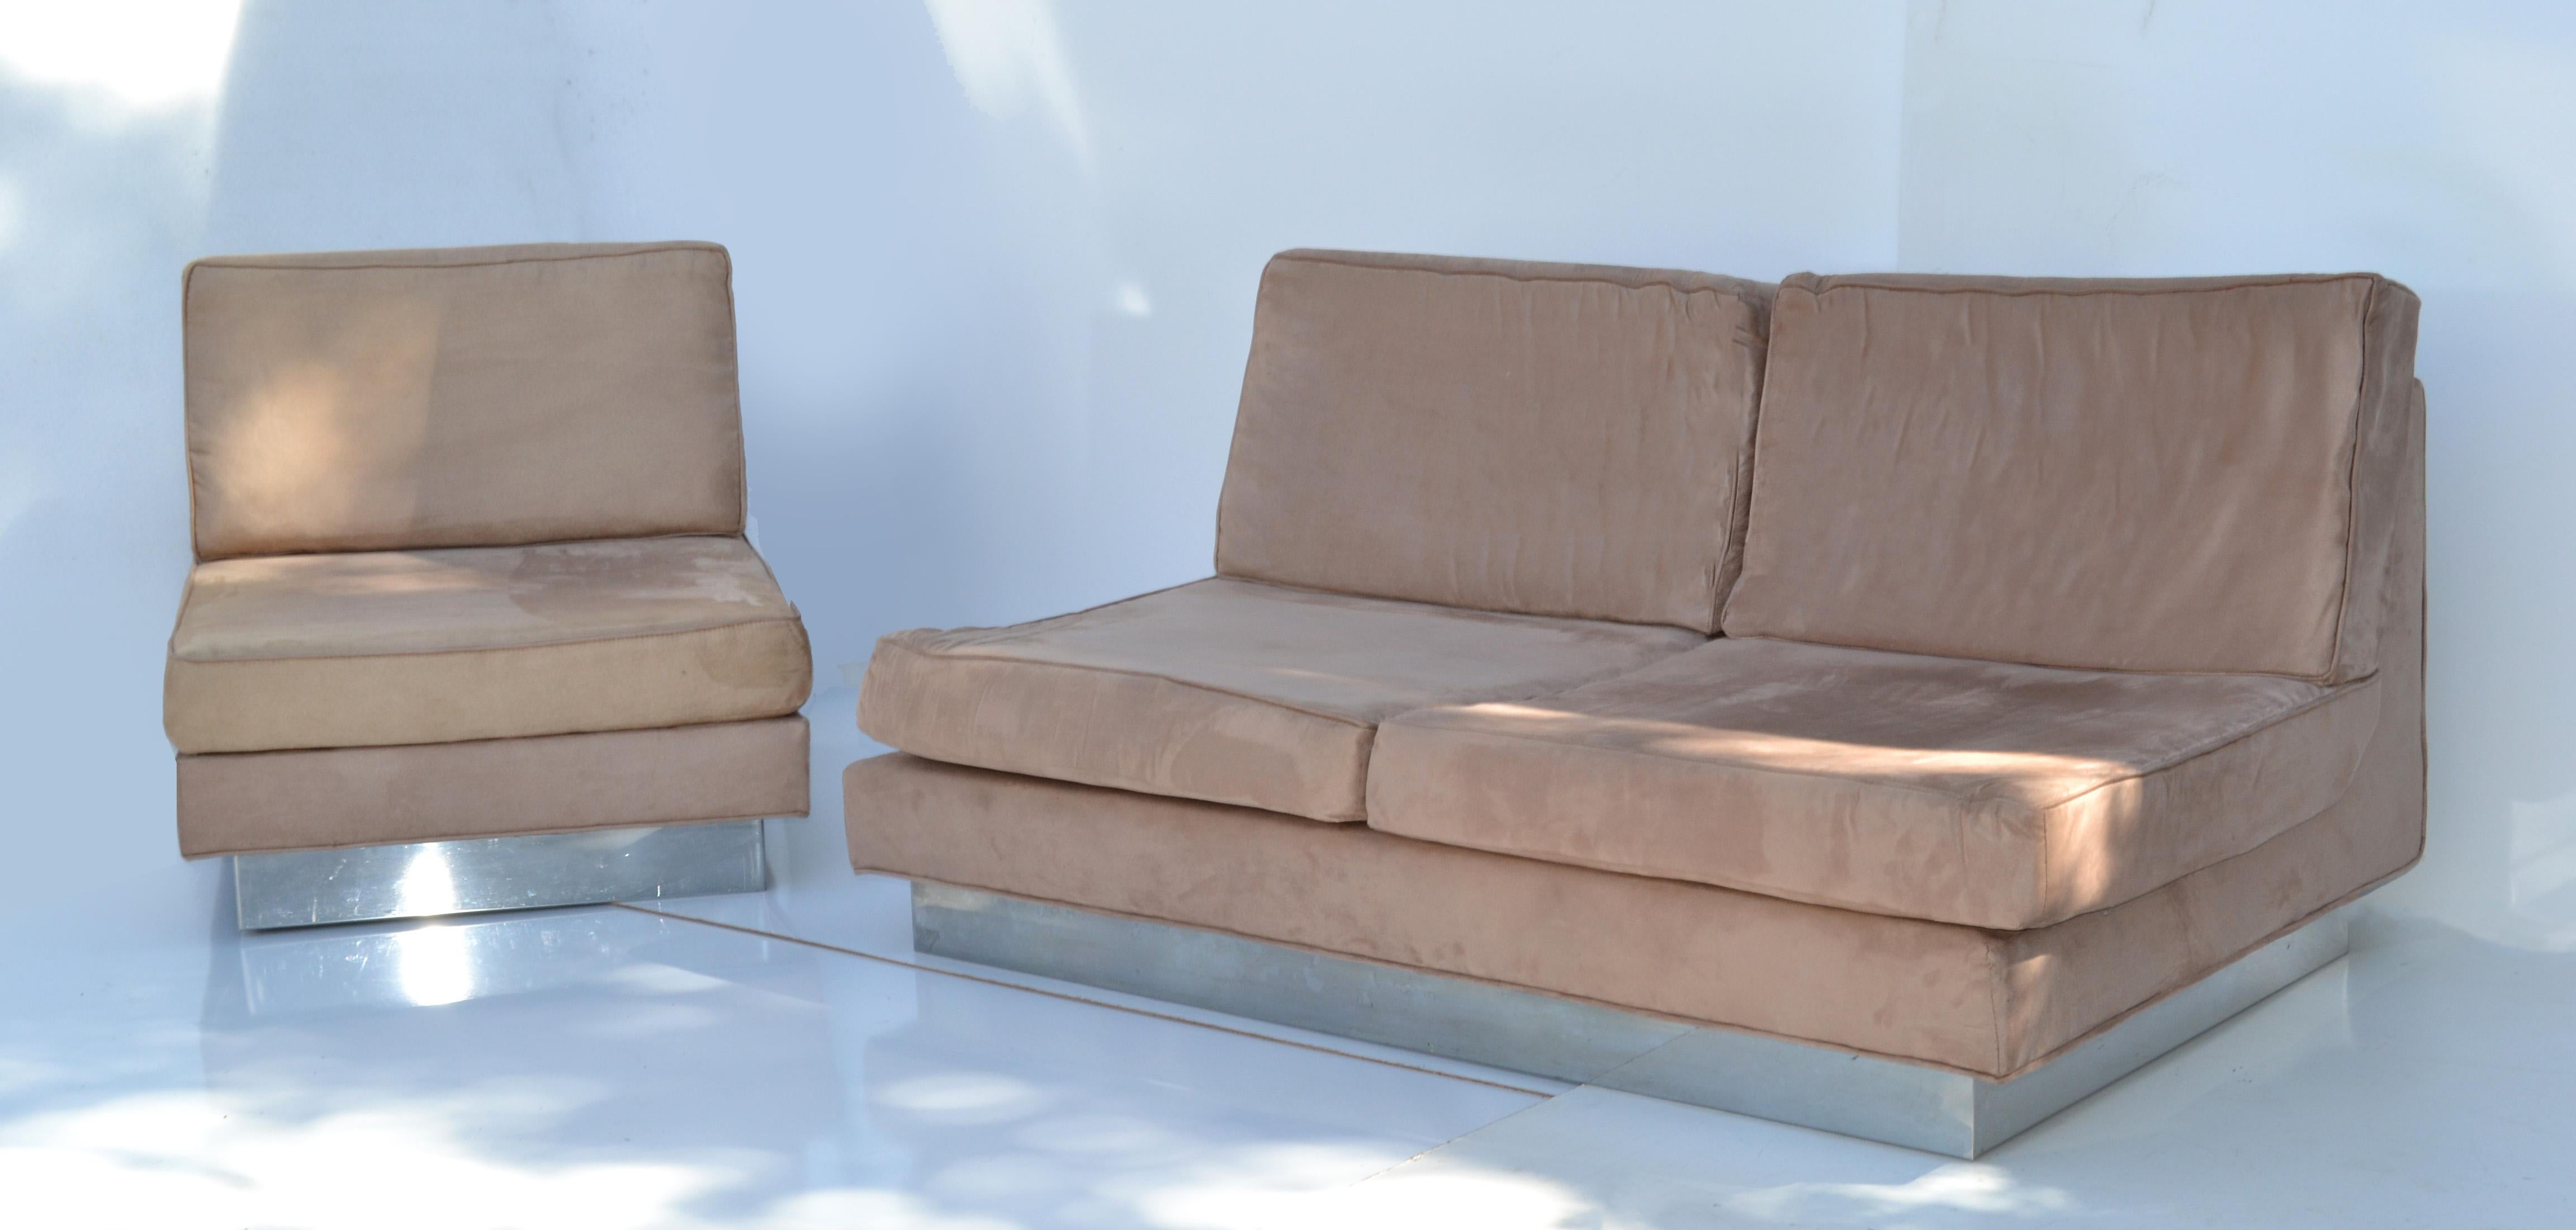 Jacques Charpentier Loveseat & Lounge Chair in Beige Ultrasuede 1970 France For Sale 5